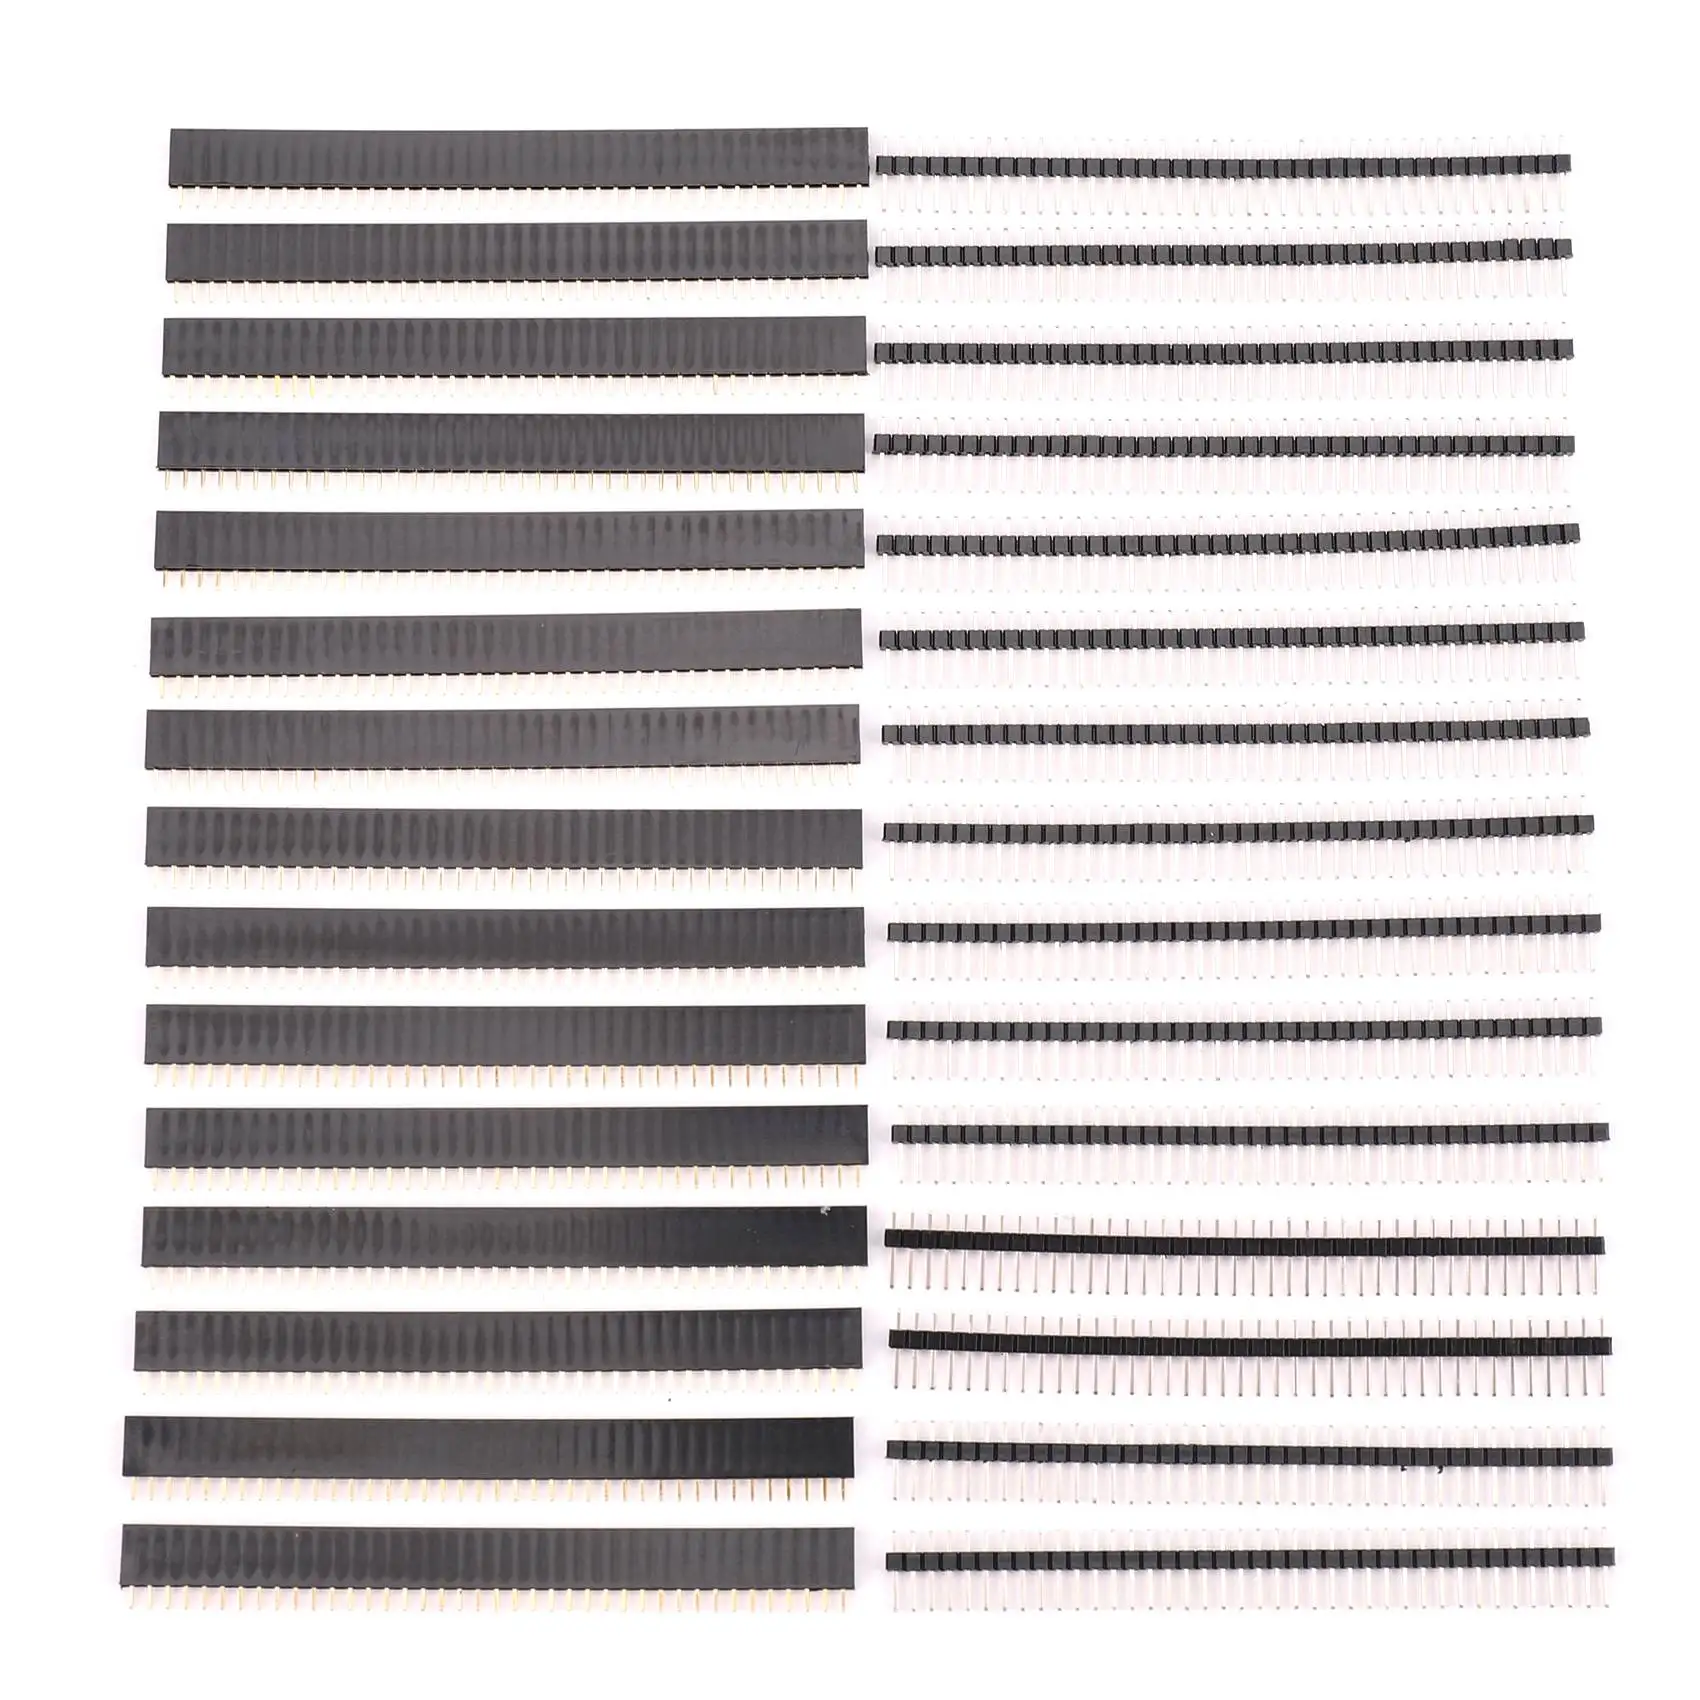 

30 Pcs 40 Pin 2.54mm Male & Female Pin headers Plug connector for Arduino Prototype Shield